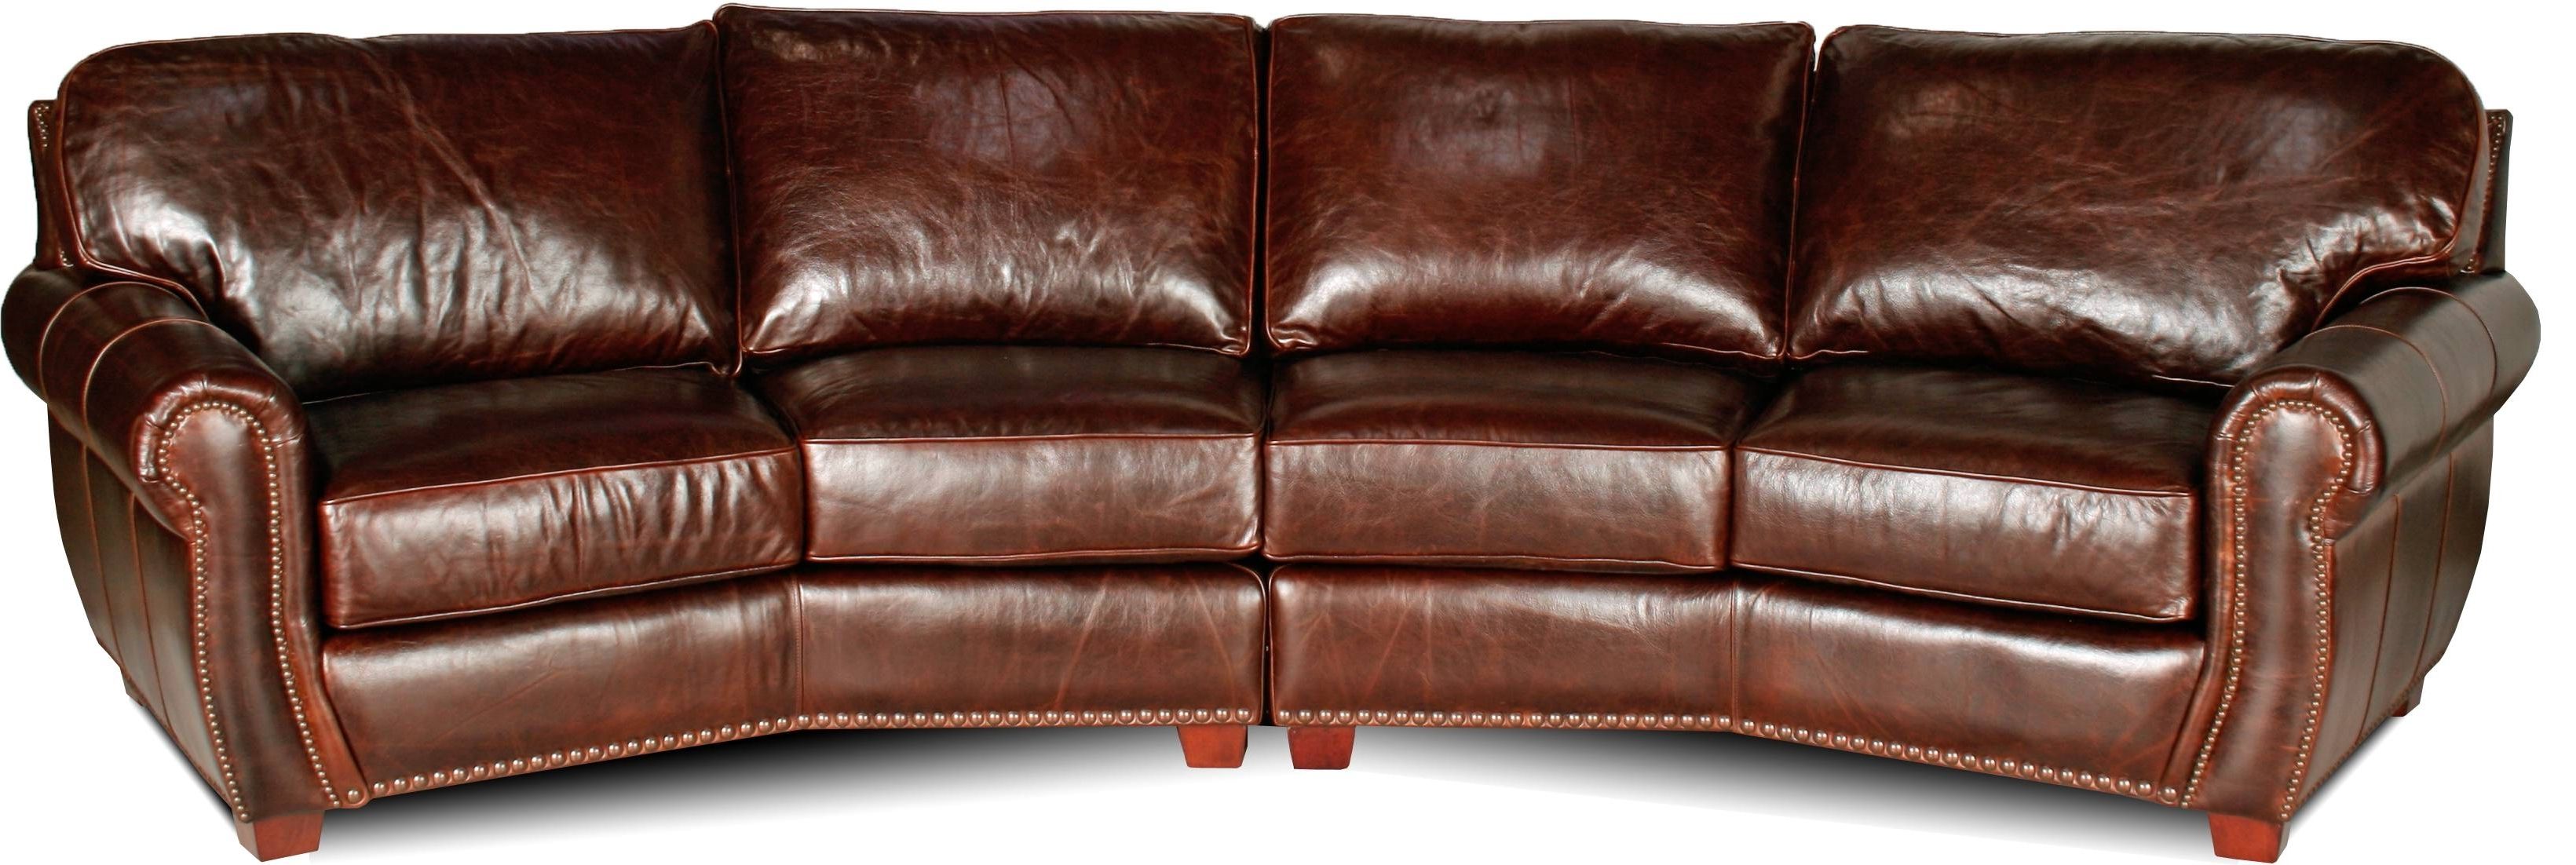 Berkshire – Leather Furniture (View 1 of 20)